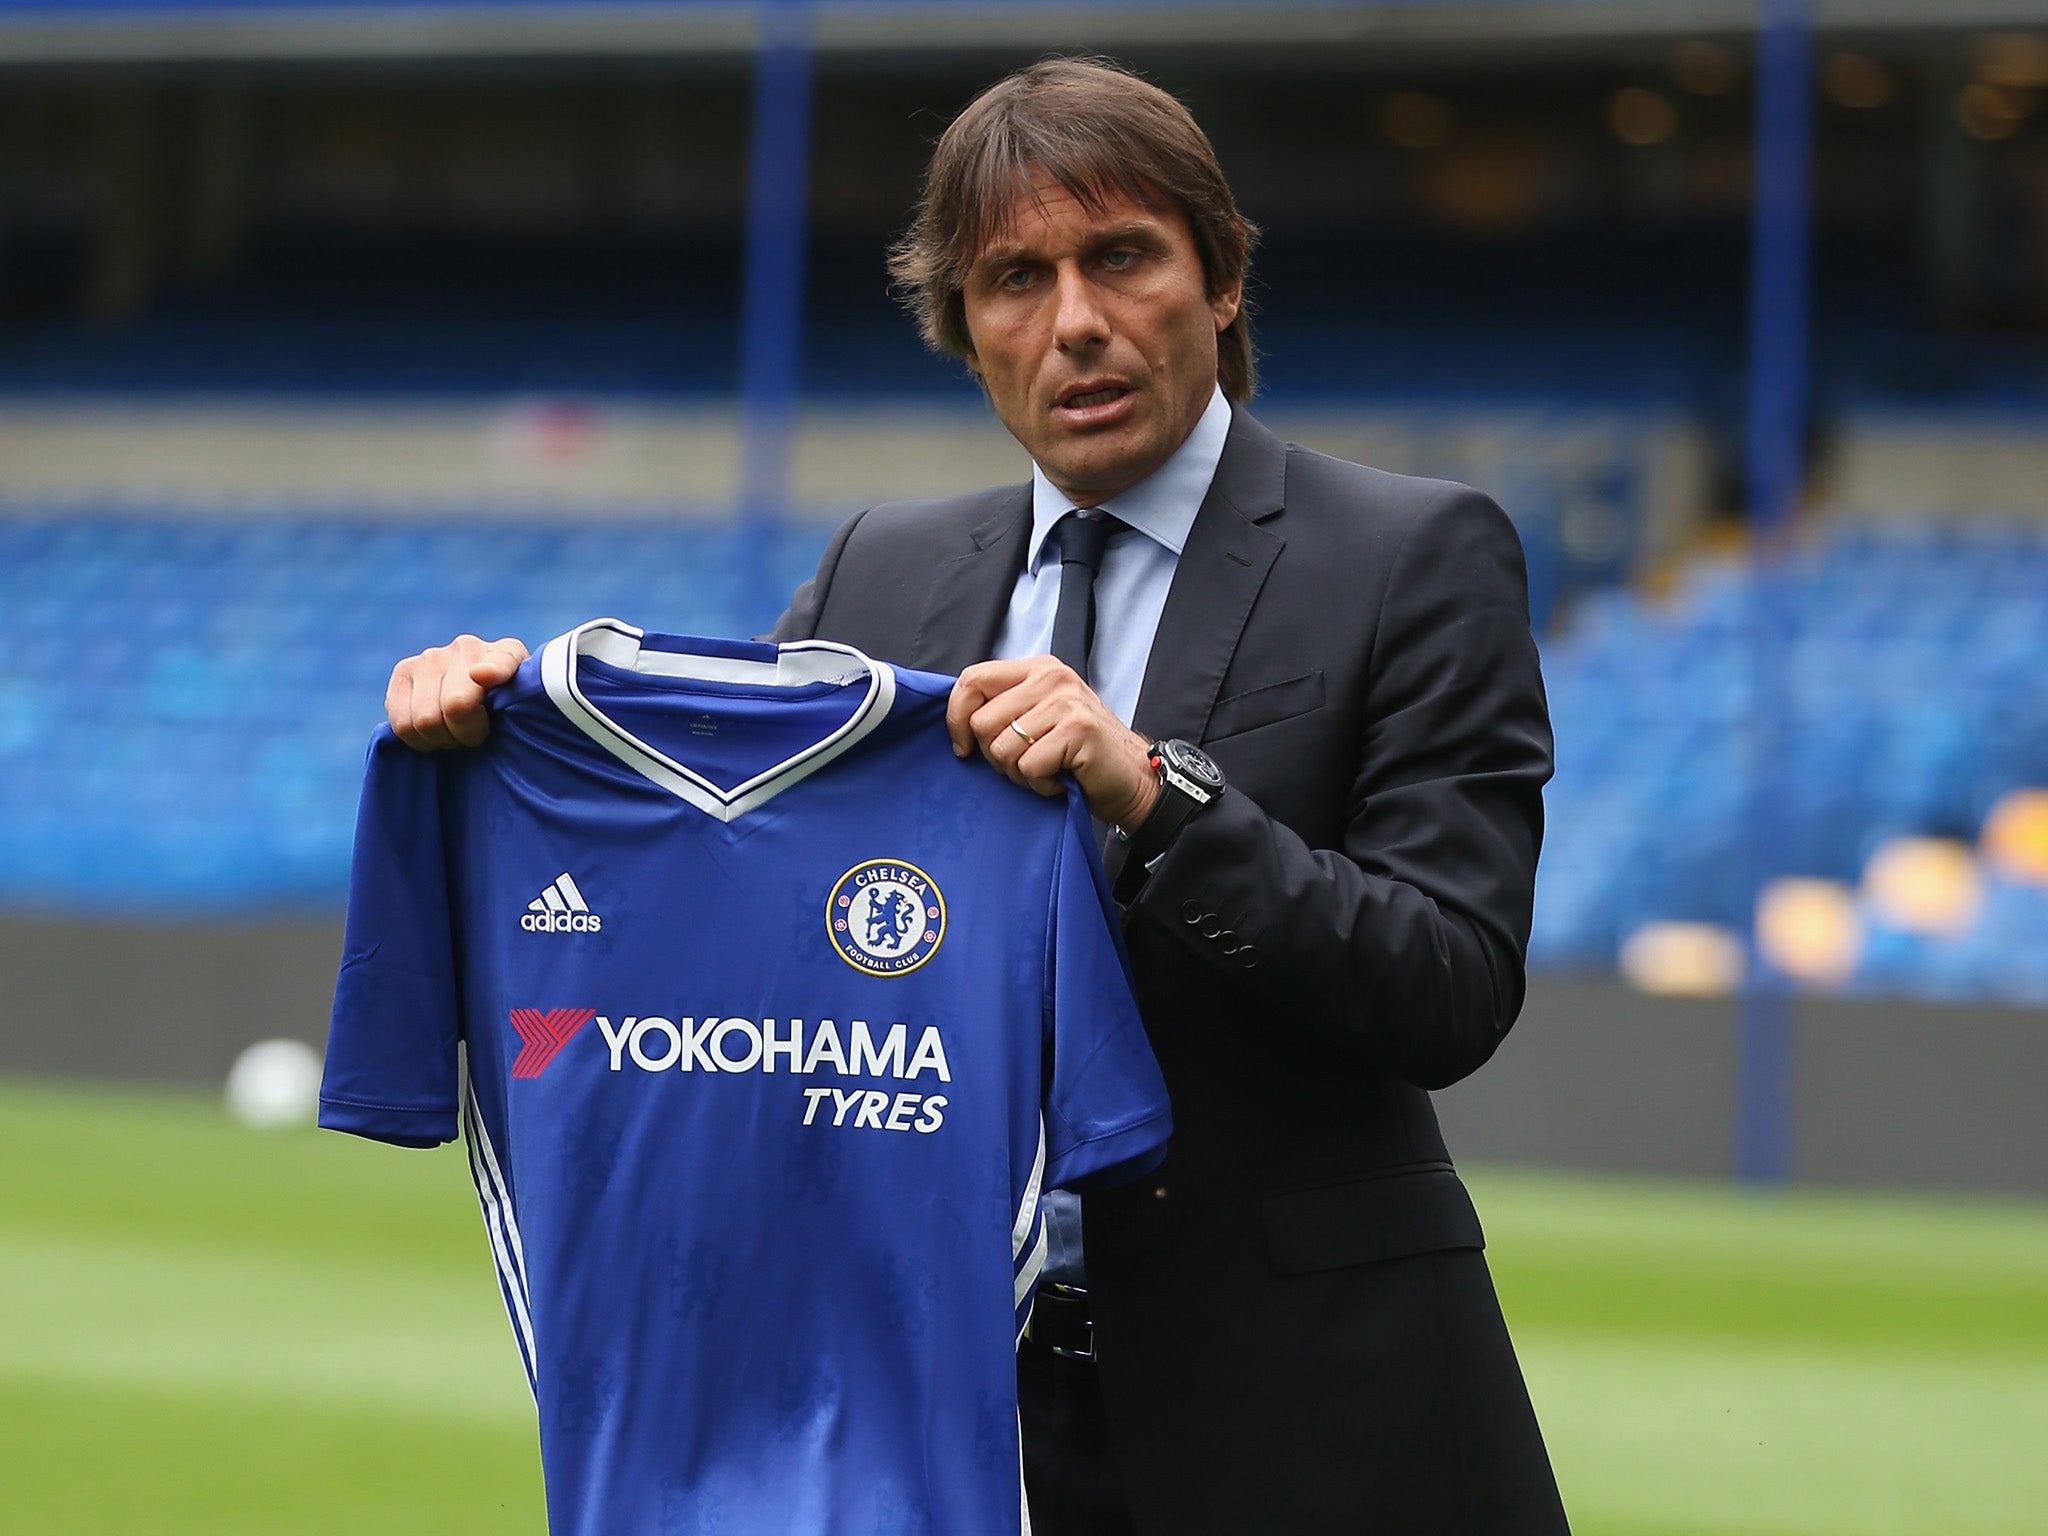 Chelsea cut short their current deal with Adidas by six years